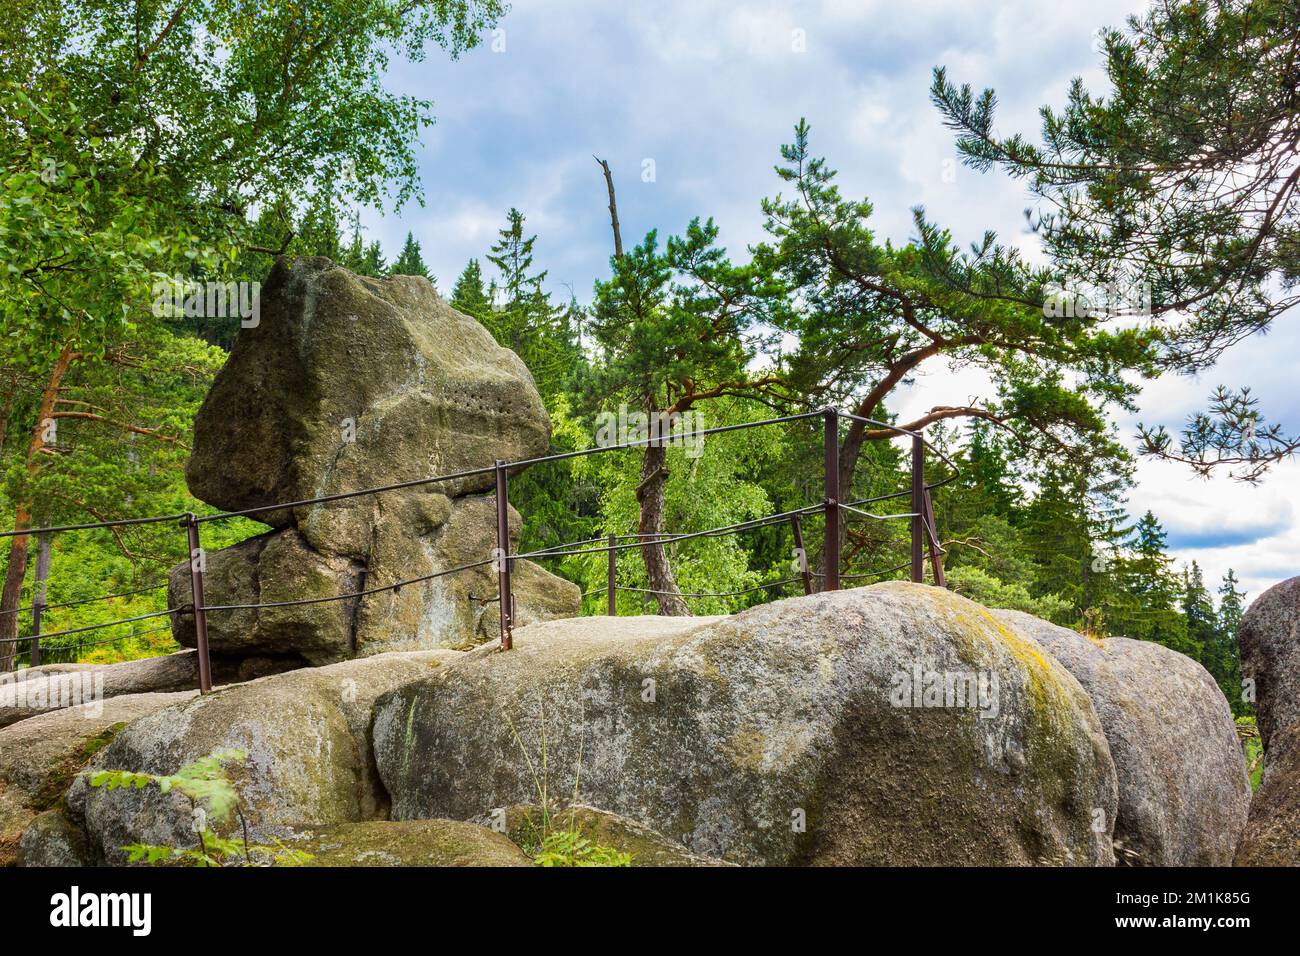 A vantage point and a rocky cliff called Skaly Husyckie in the Sokole Mountains, Poland Stock Photo